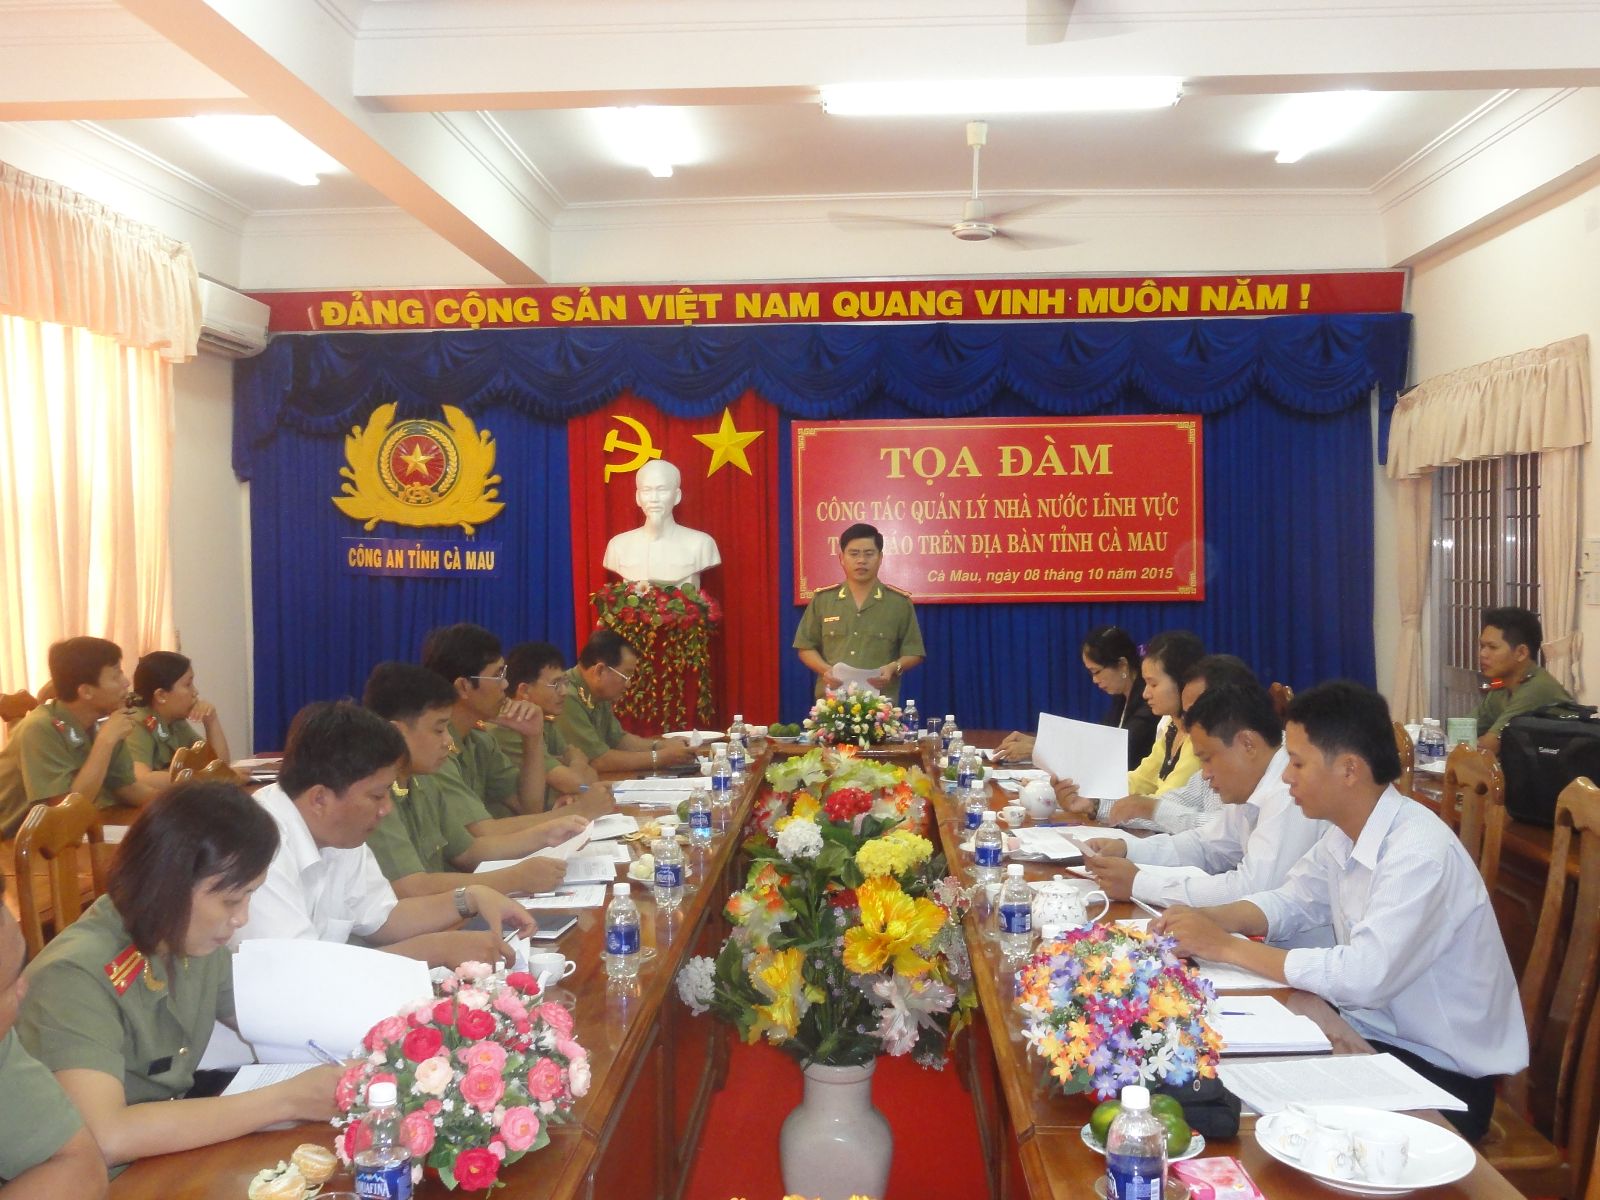 Ca Mau province: Seminar on State management on religion held